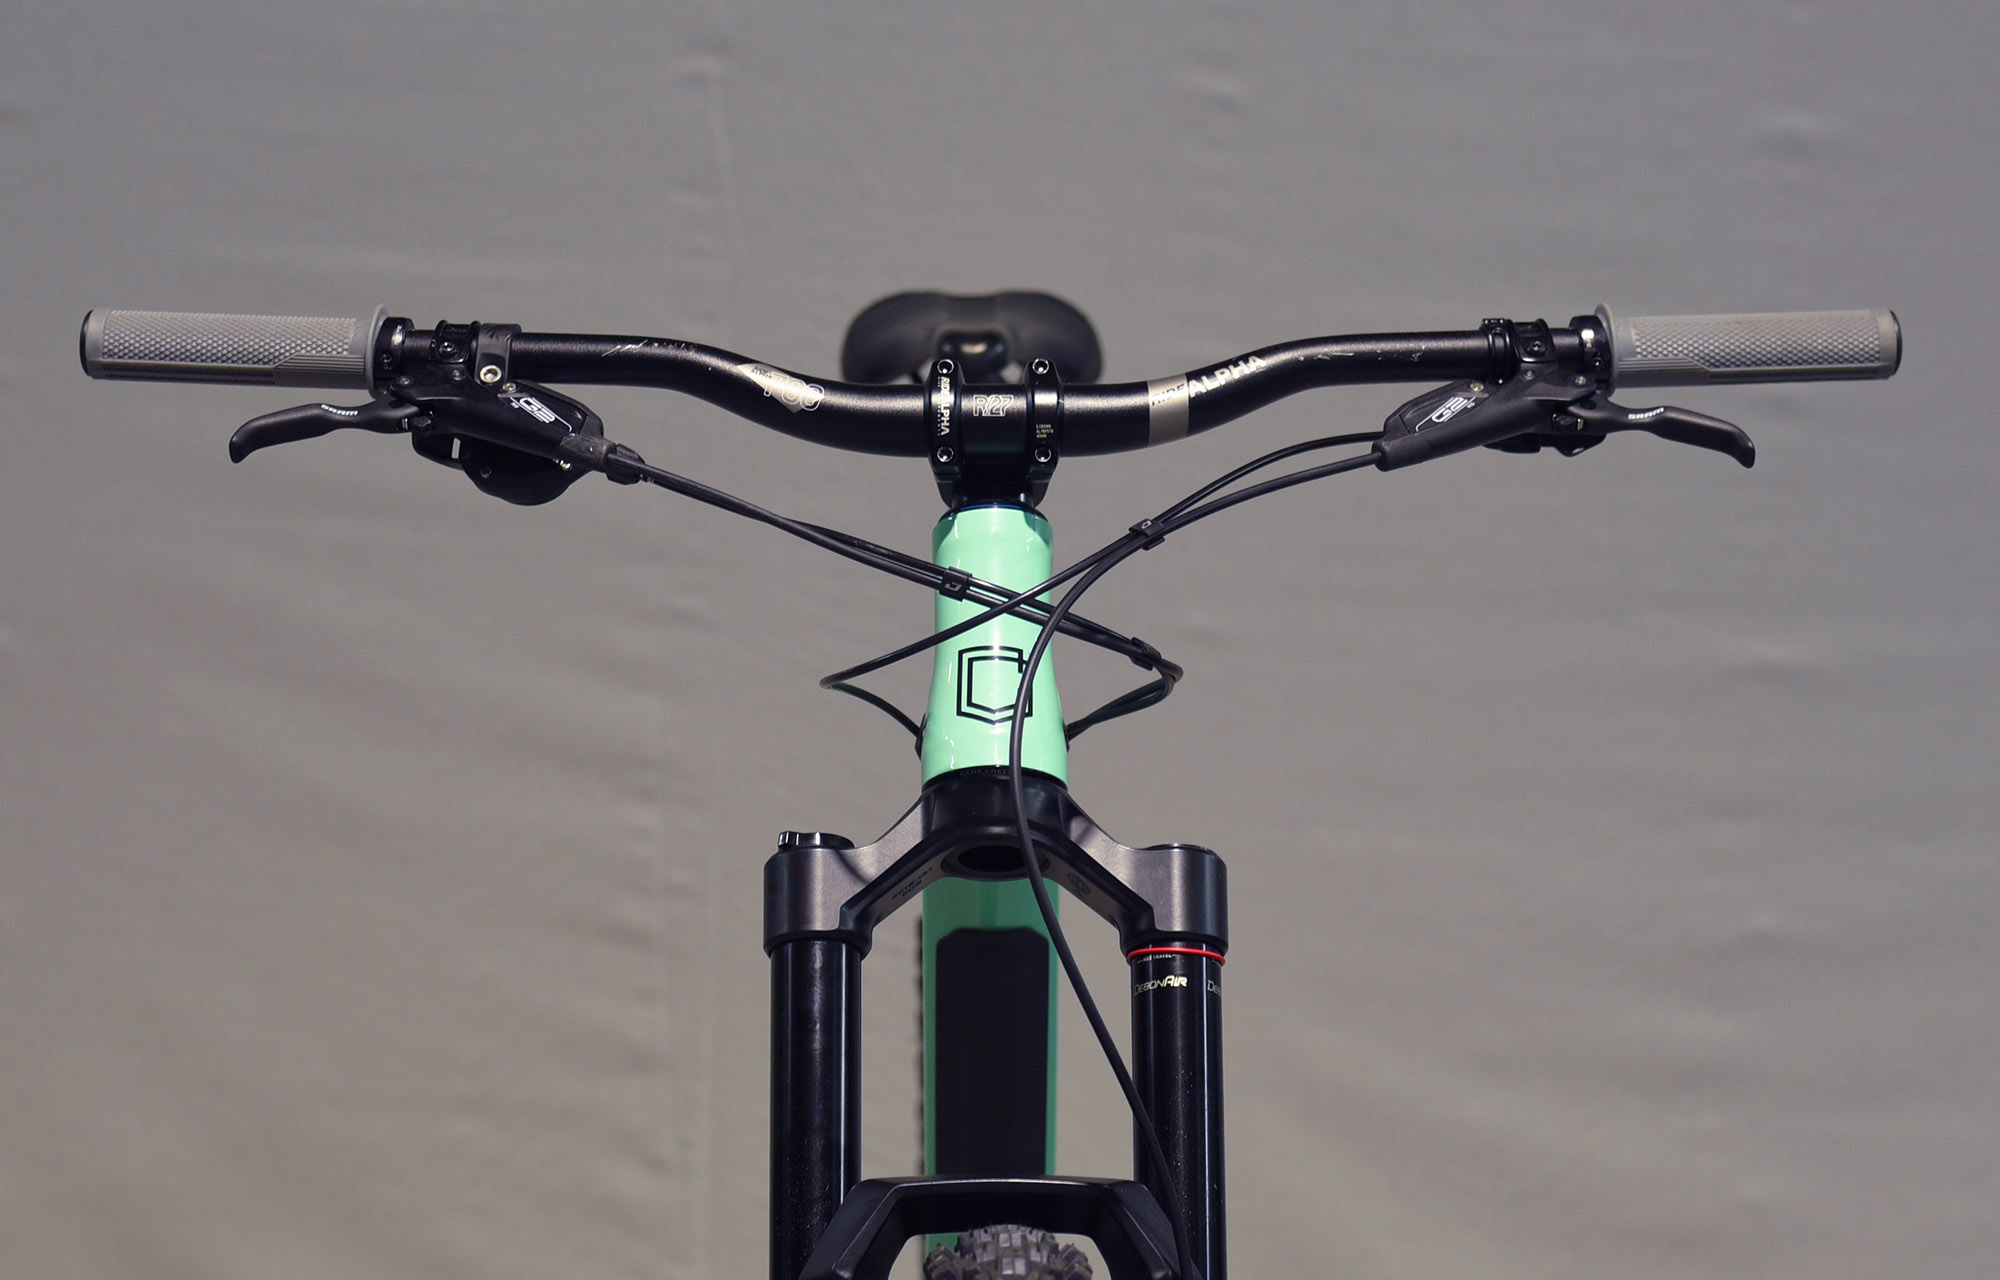 COMMENCAL CLASH RIDE EMERALD  GREEN NEW ROCKSHOX - L (23130103) image number null